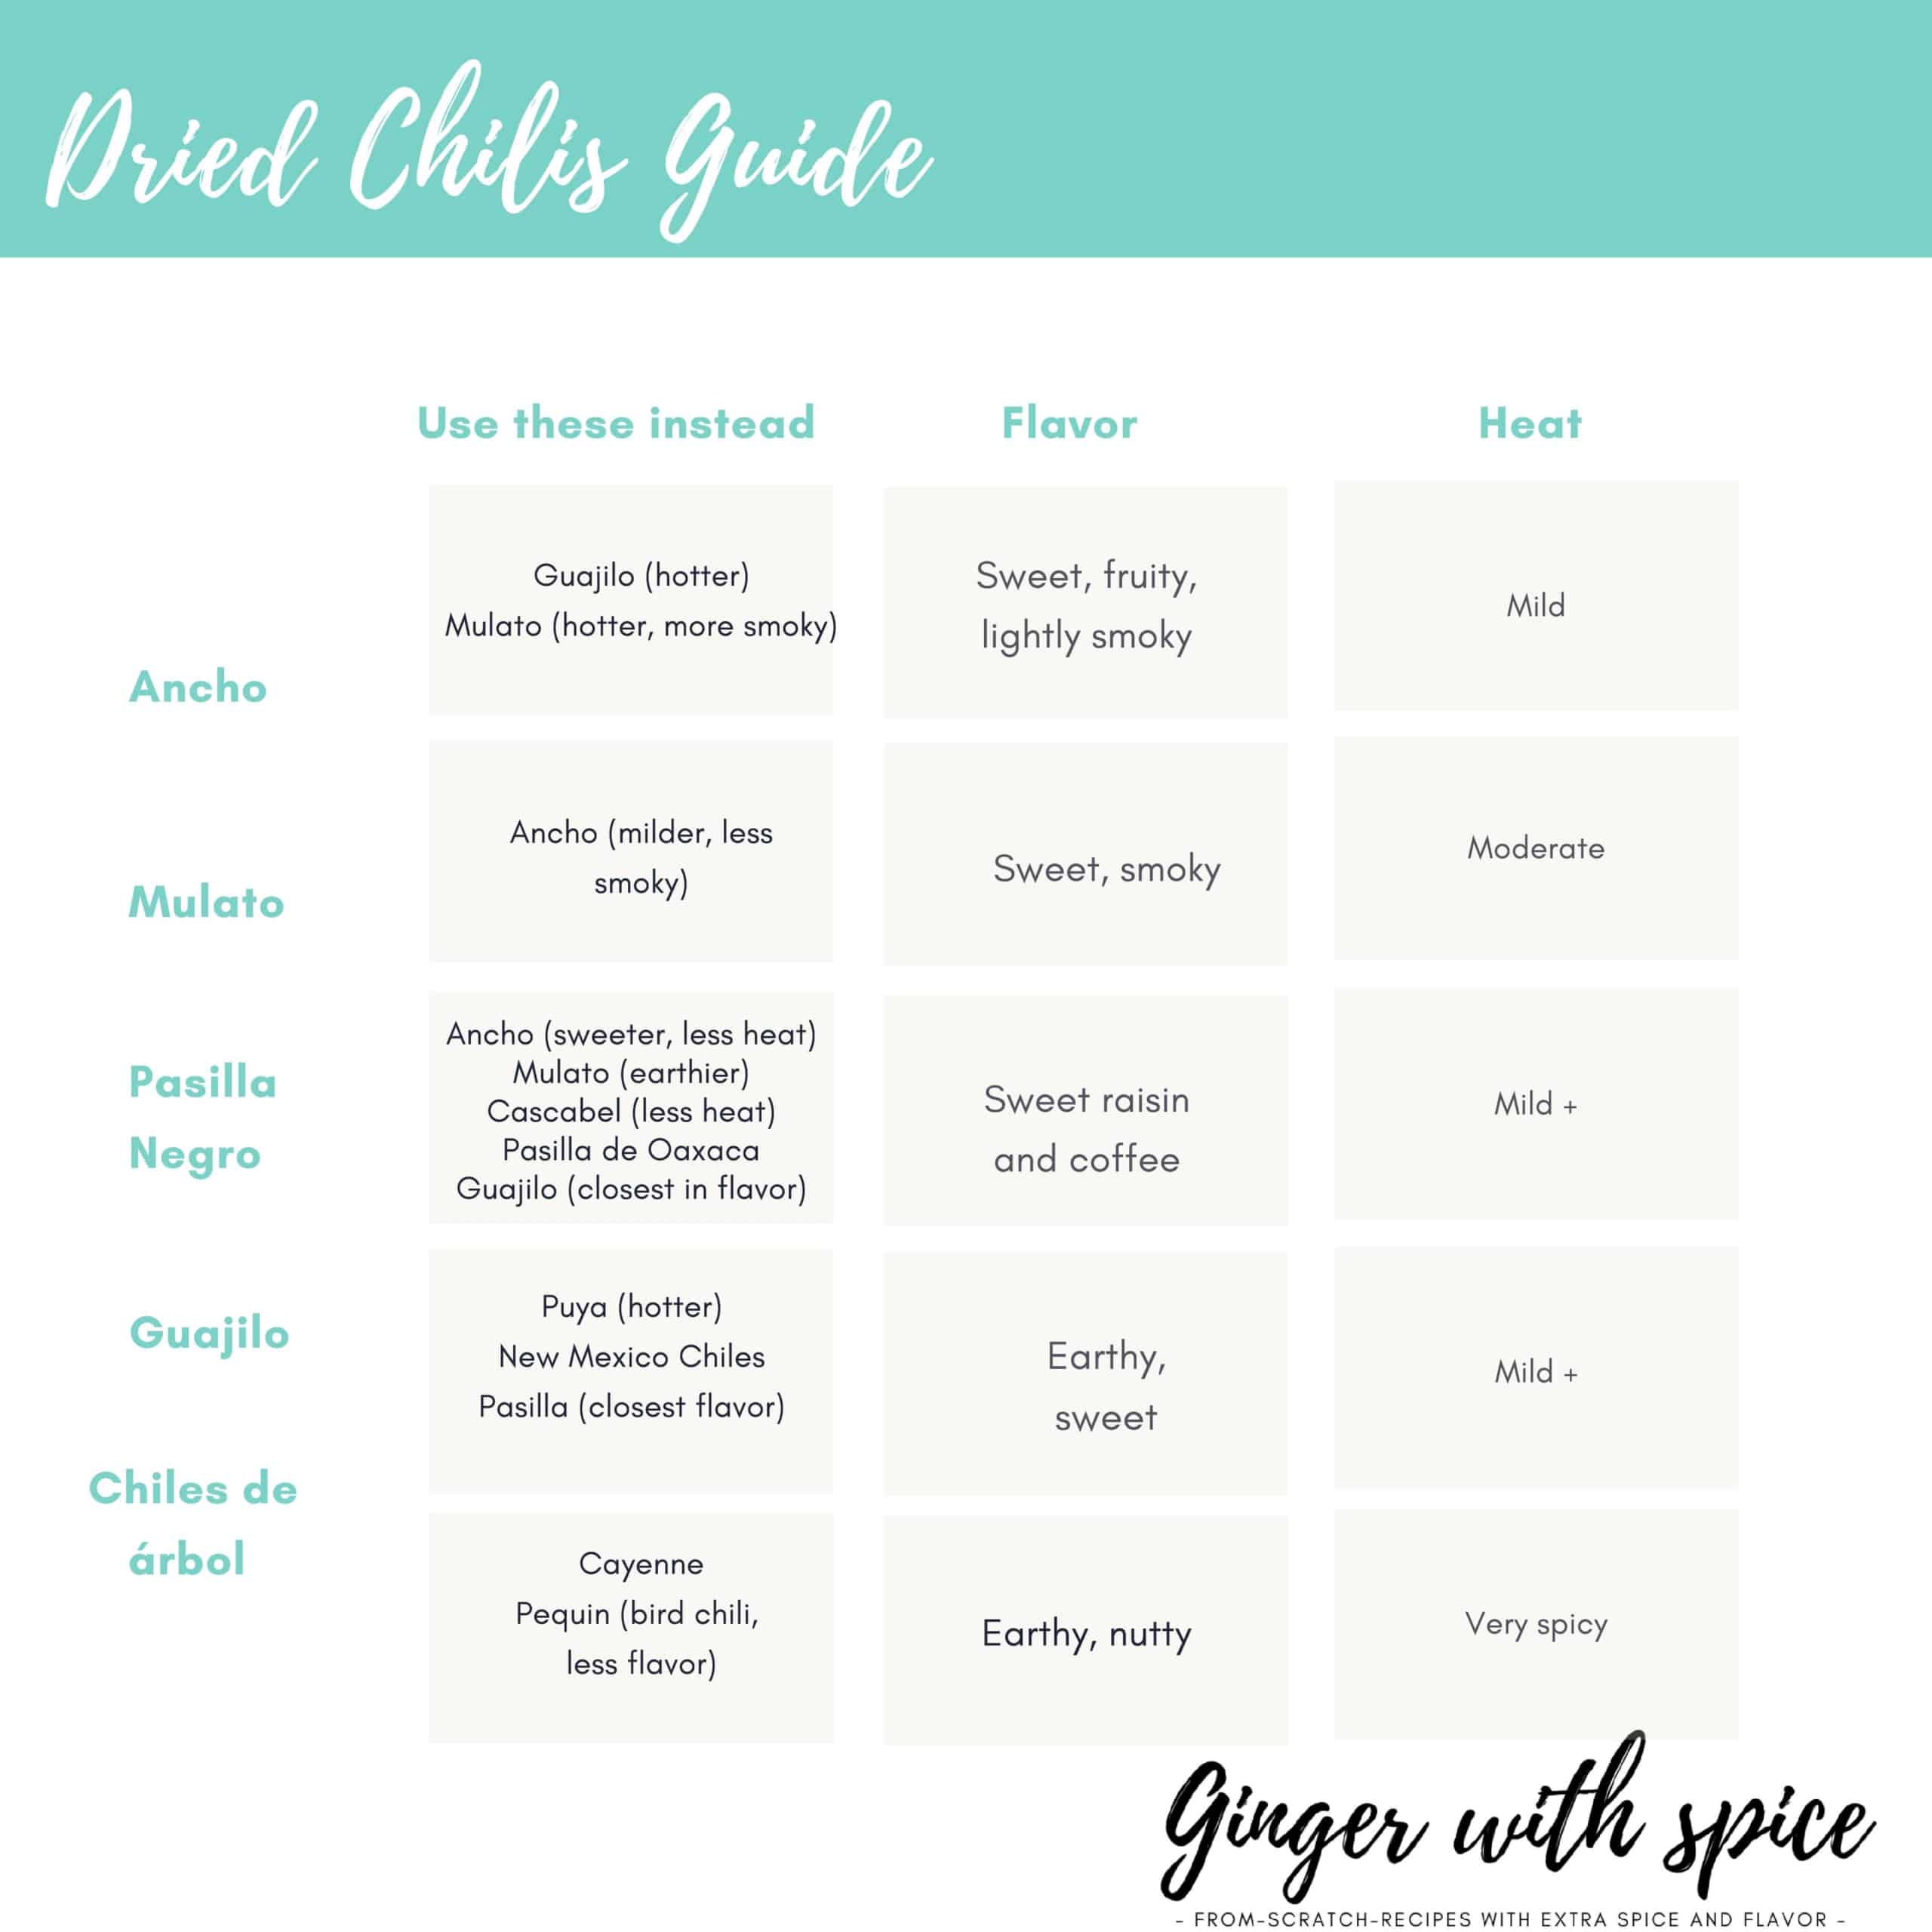 Dried chilis guide infographic.